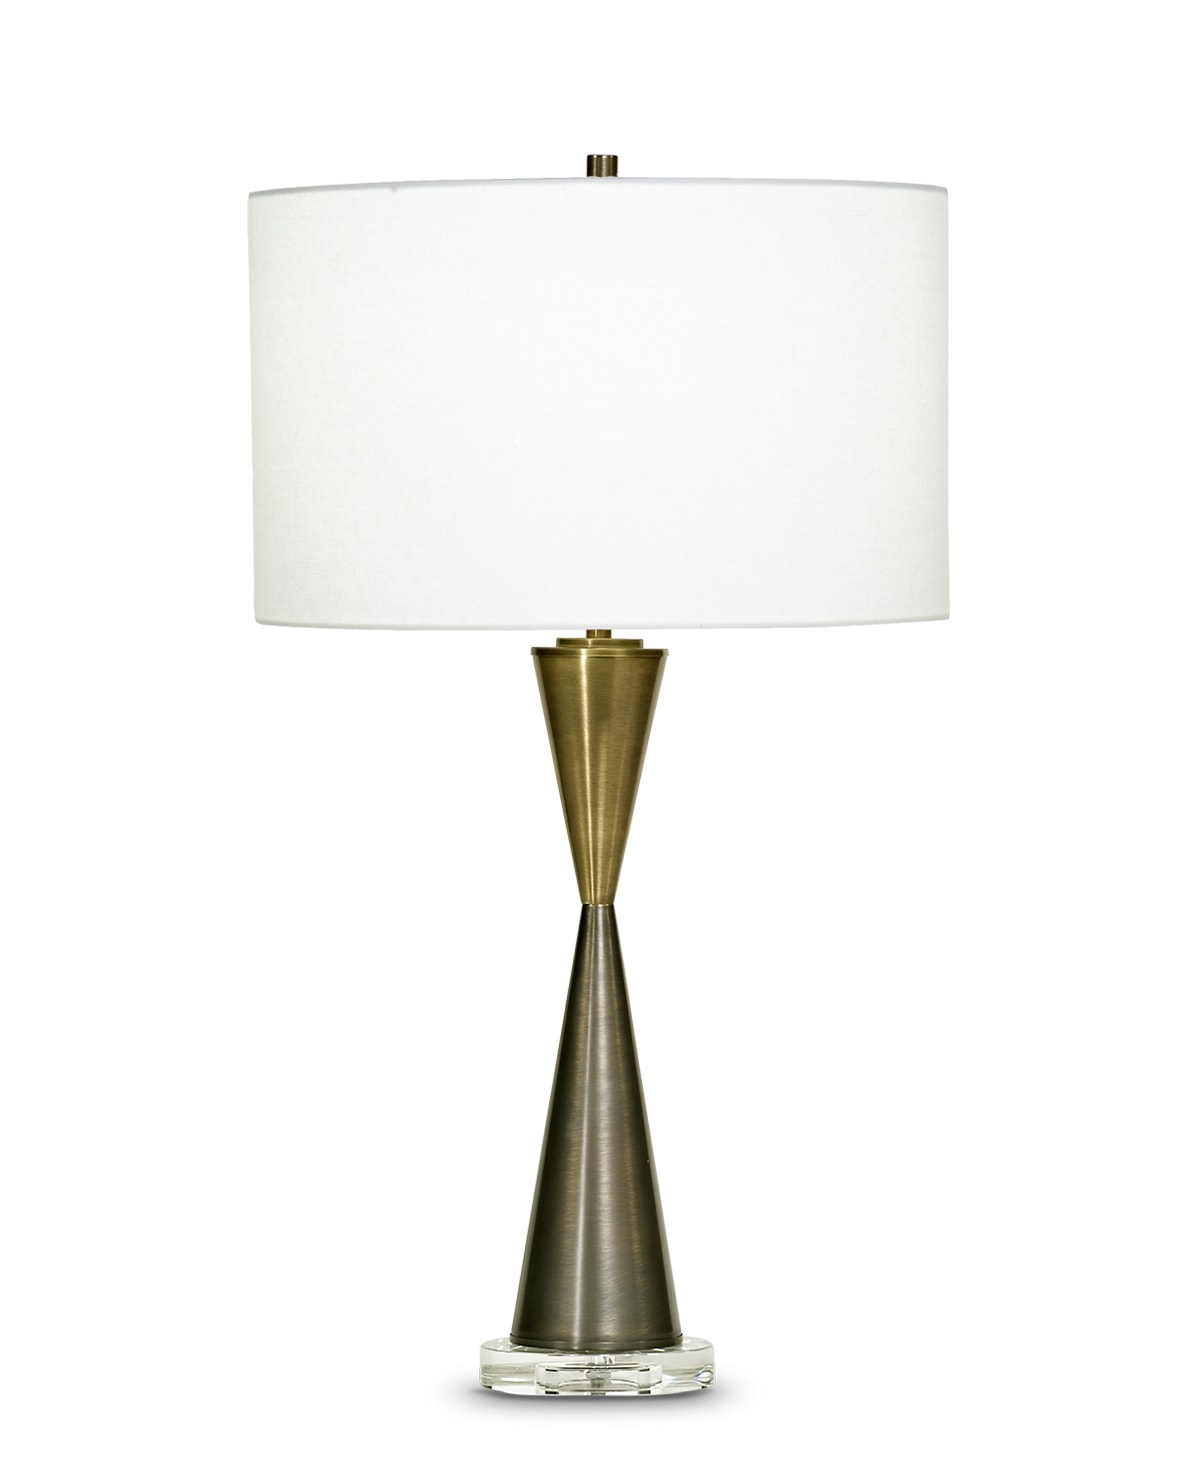 FlowDecor Magnolia Table Lamp in metal with antique brass & bronze finishes and off-white linen drum shade (# 3709)